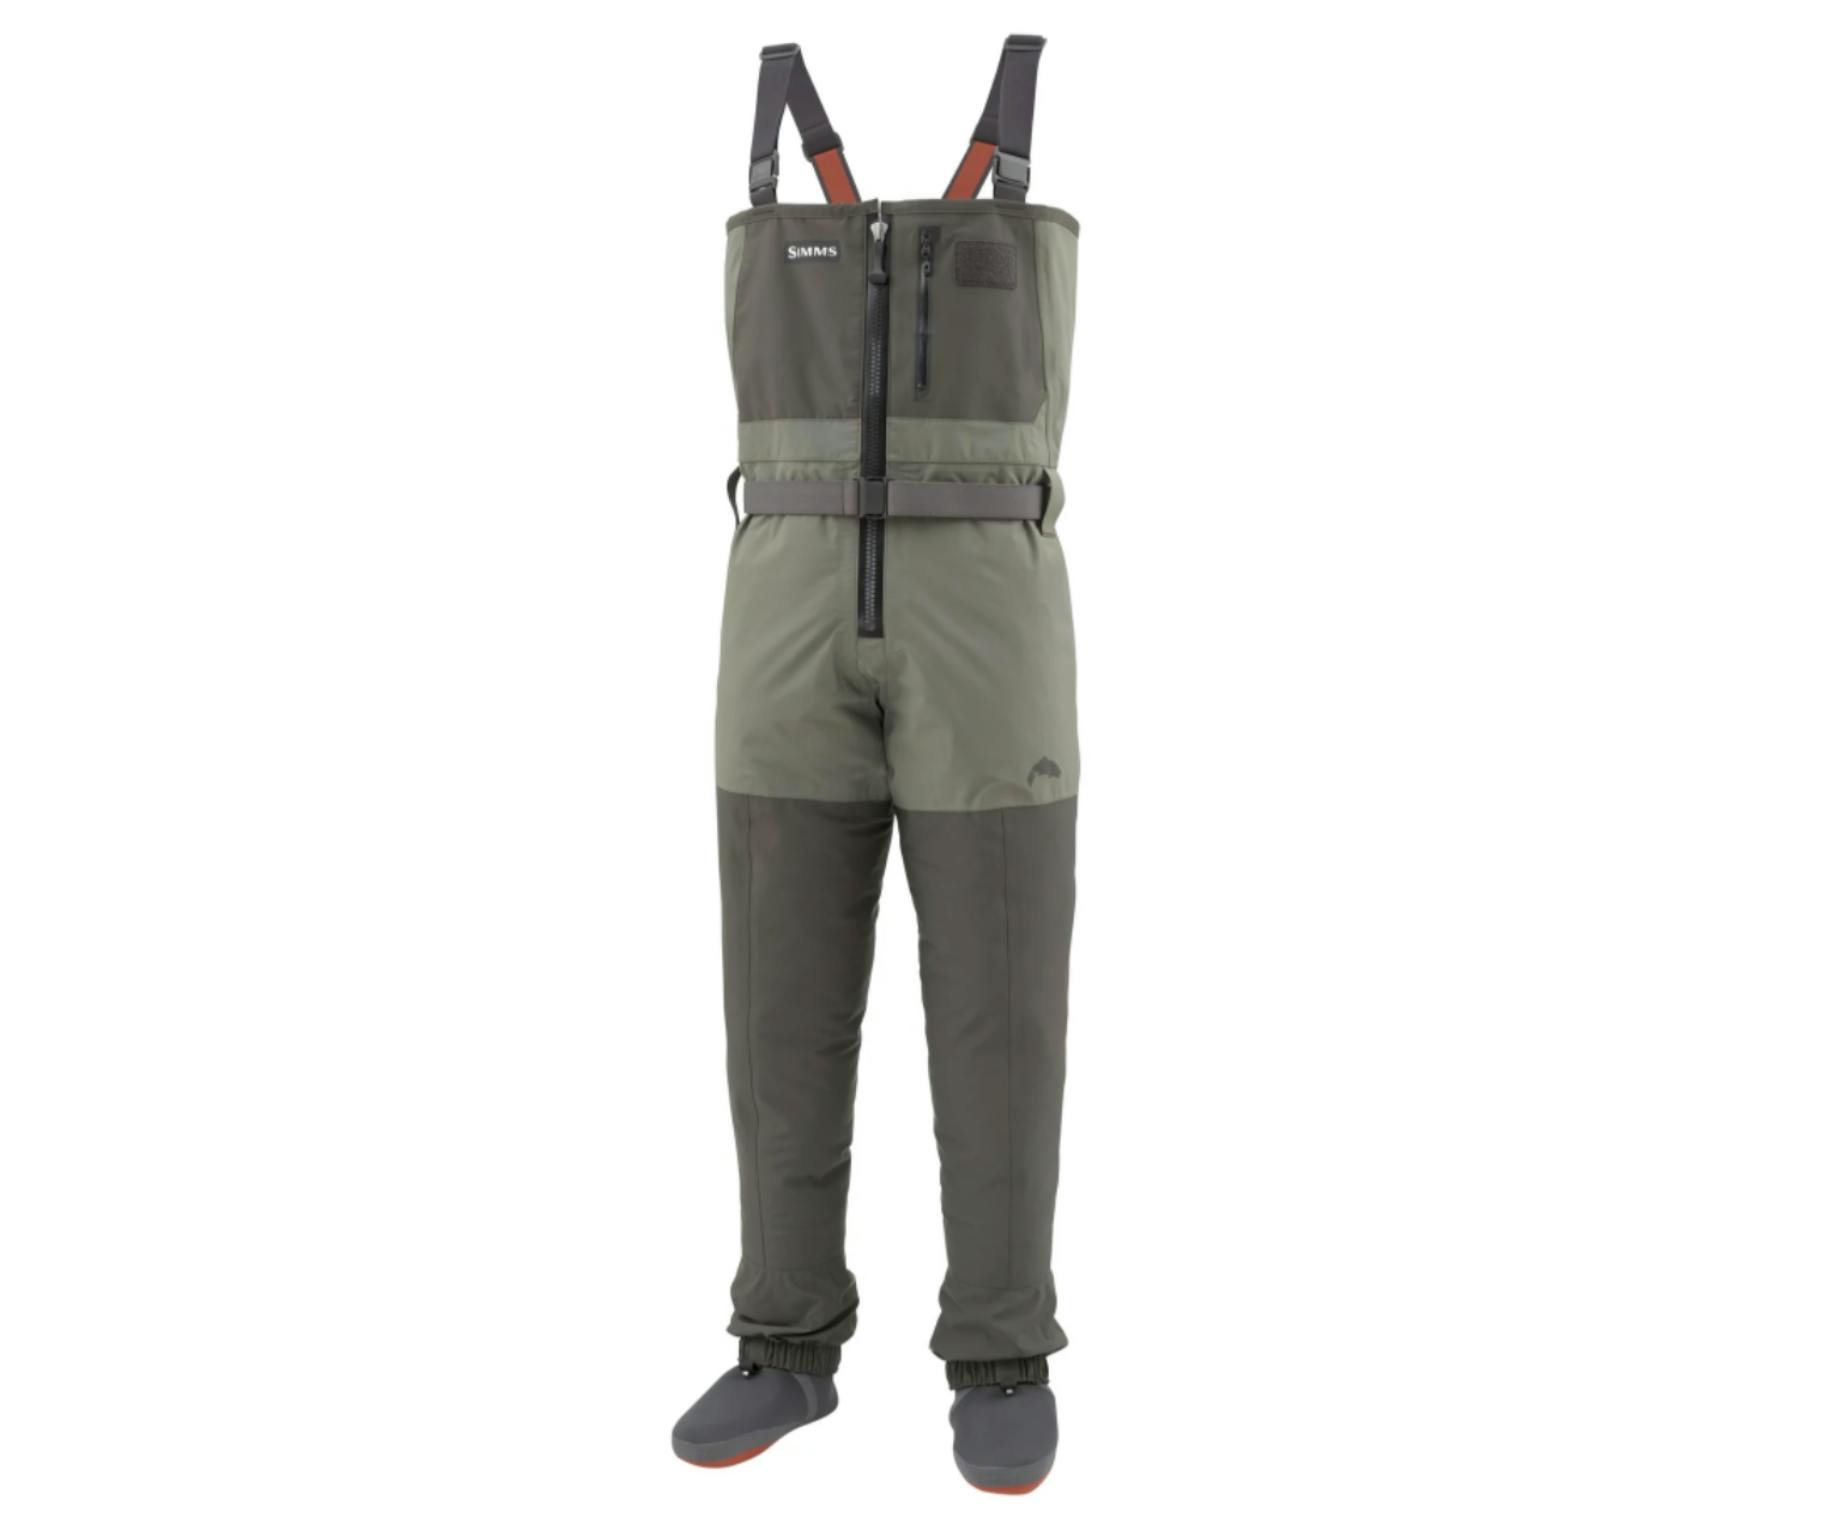 Product image of the Simms Men's Freestone Z Stockingfoot Waders.